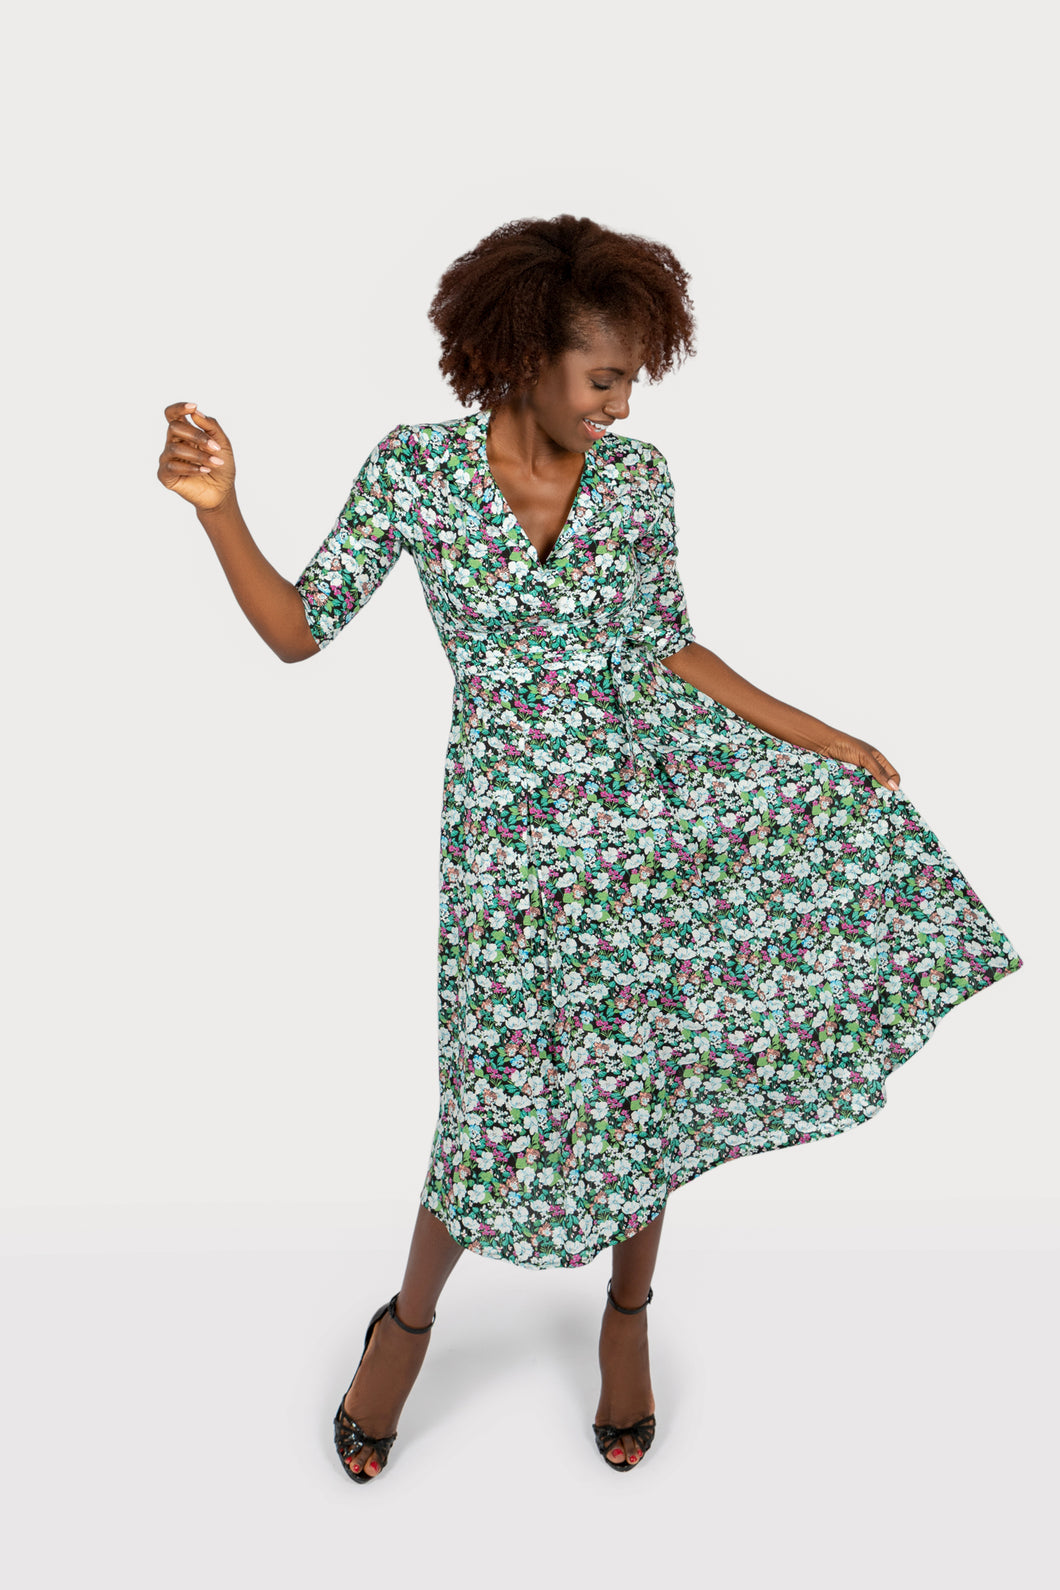 The Dorothy and Frances dress in purple & green floral print cotton